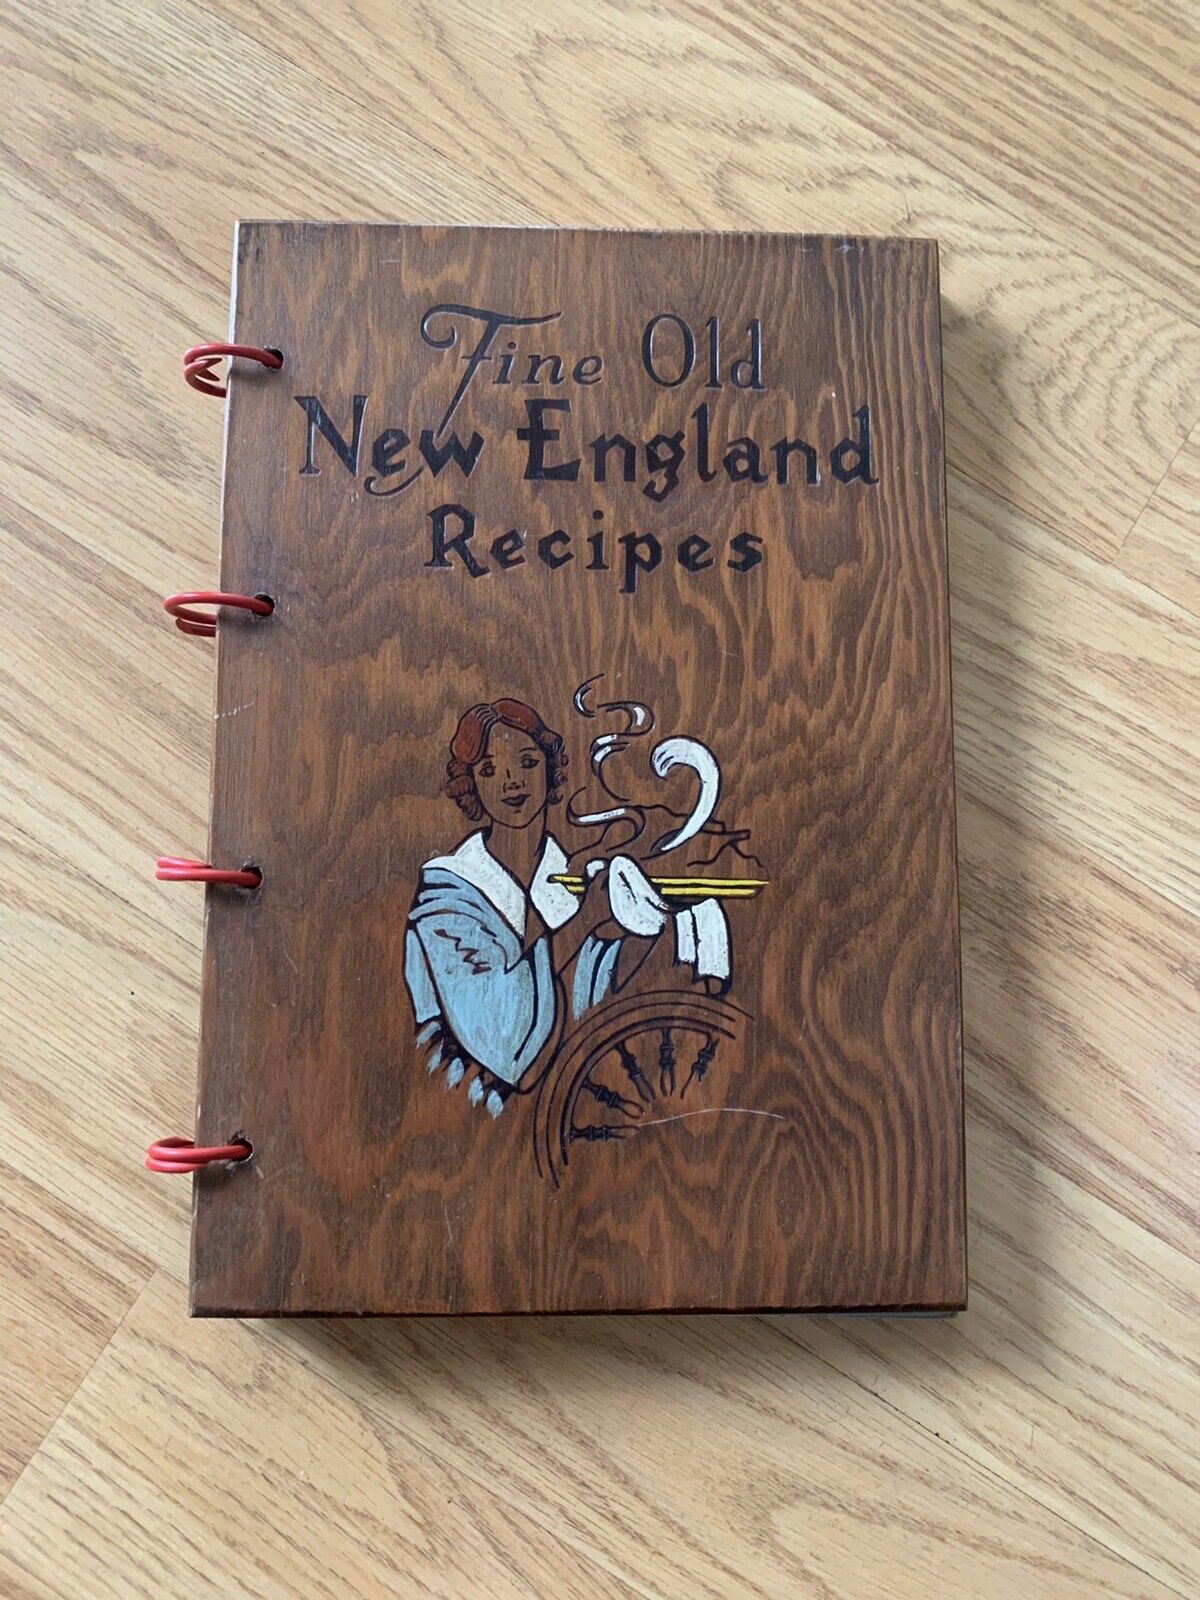 VINTAGE Fine Old New England Recipes WOOD COVER COOKBOOK CULINARY BAKING